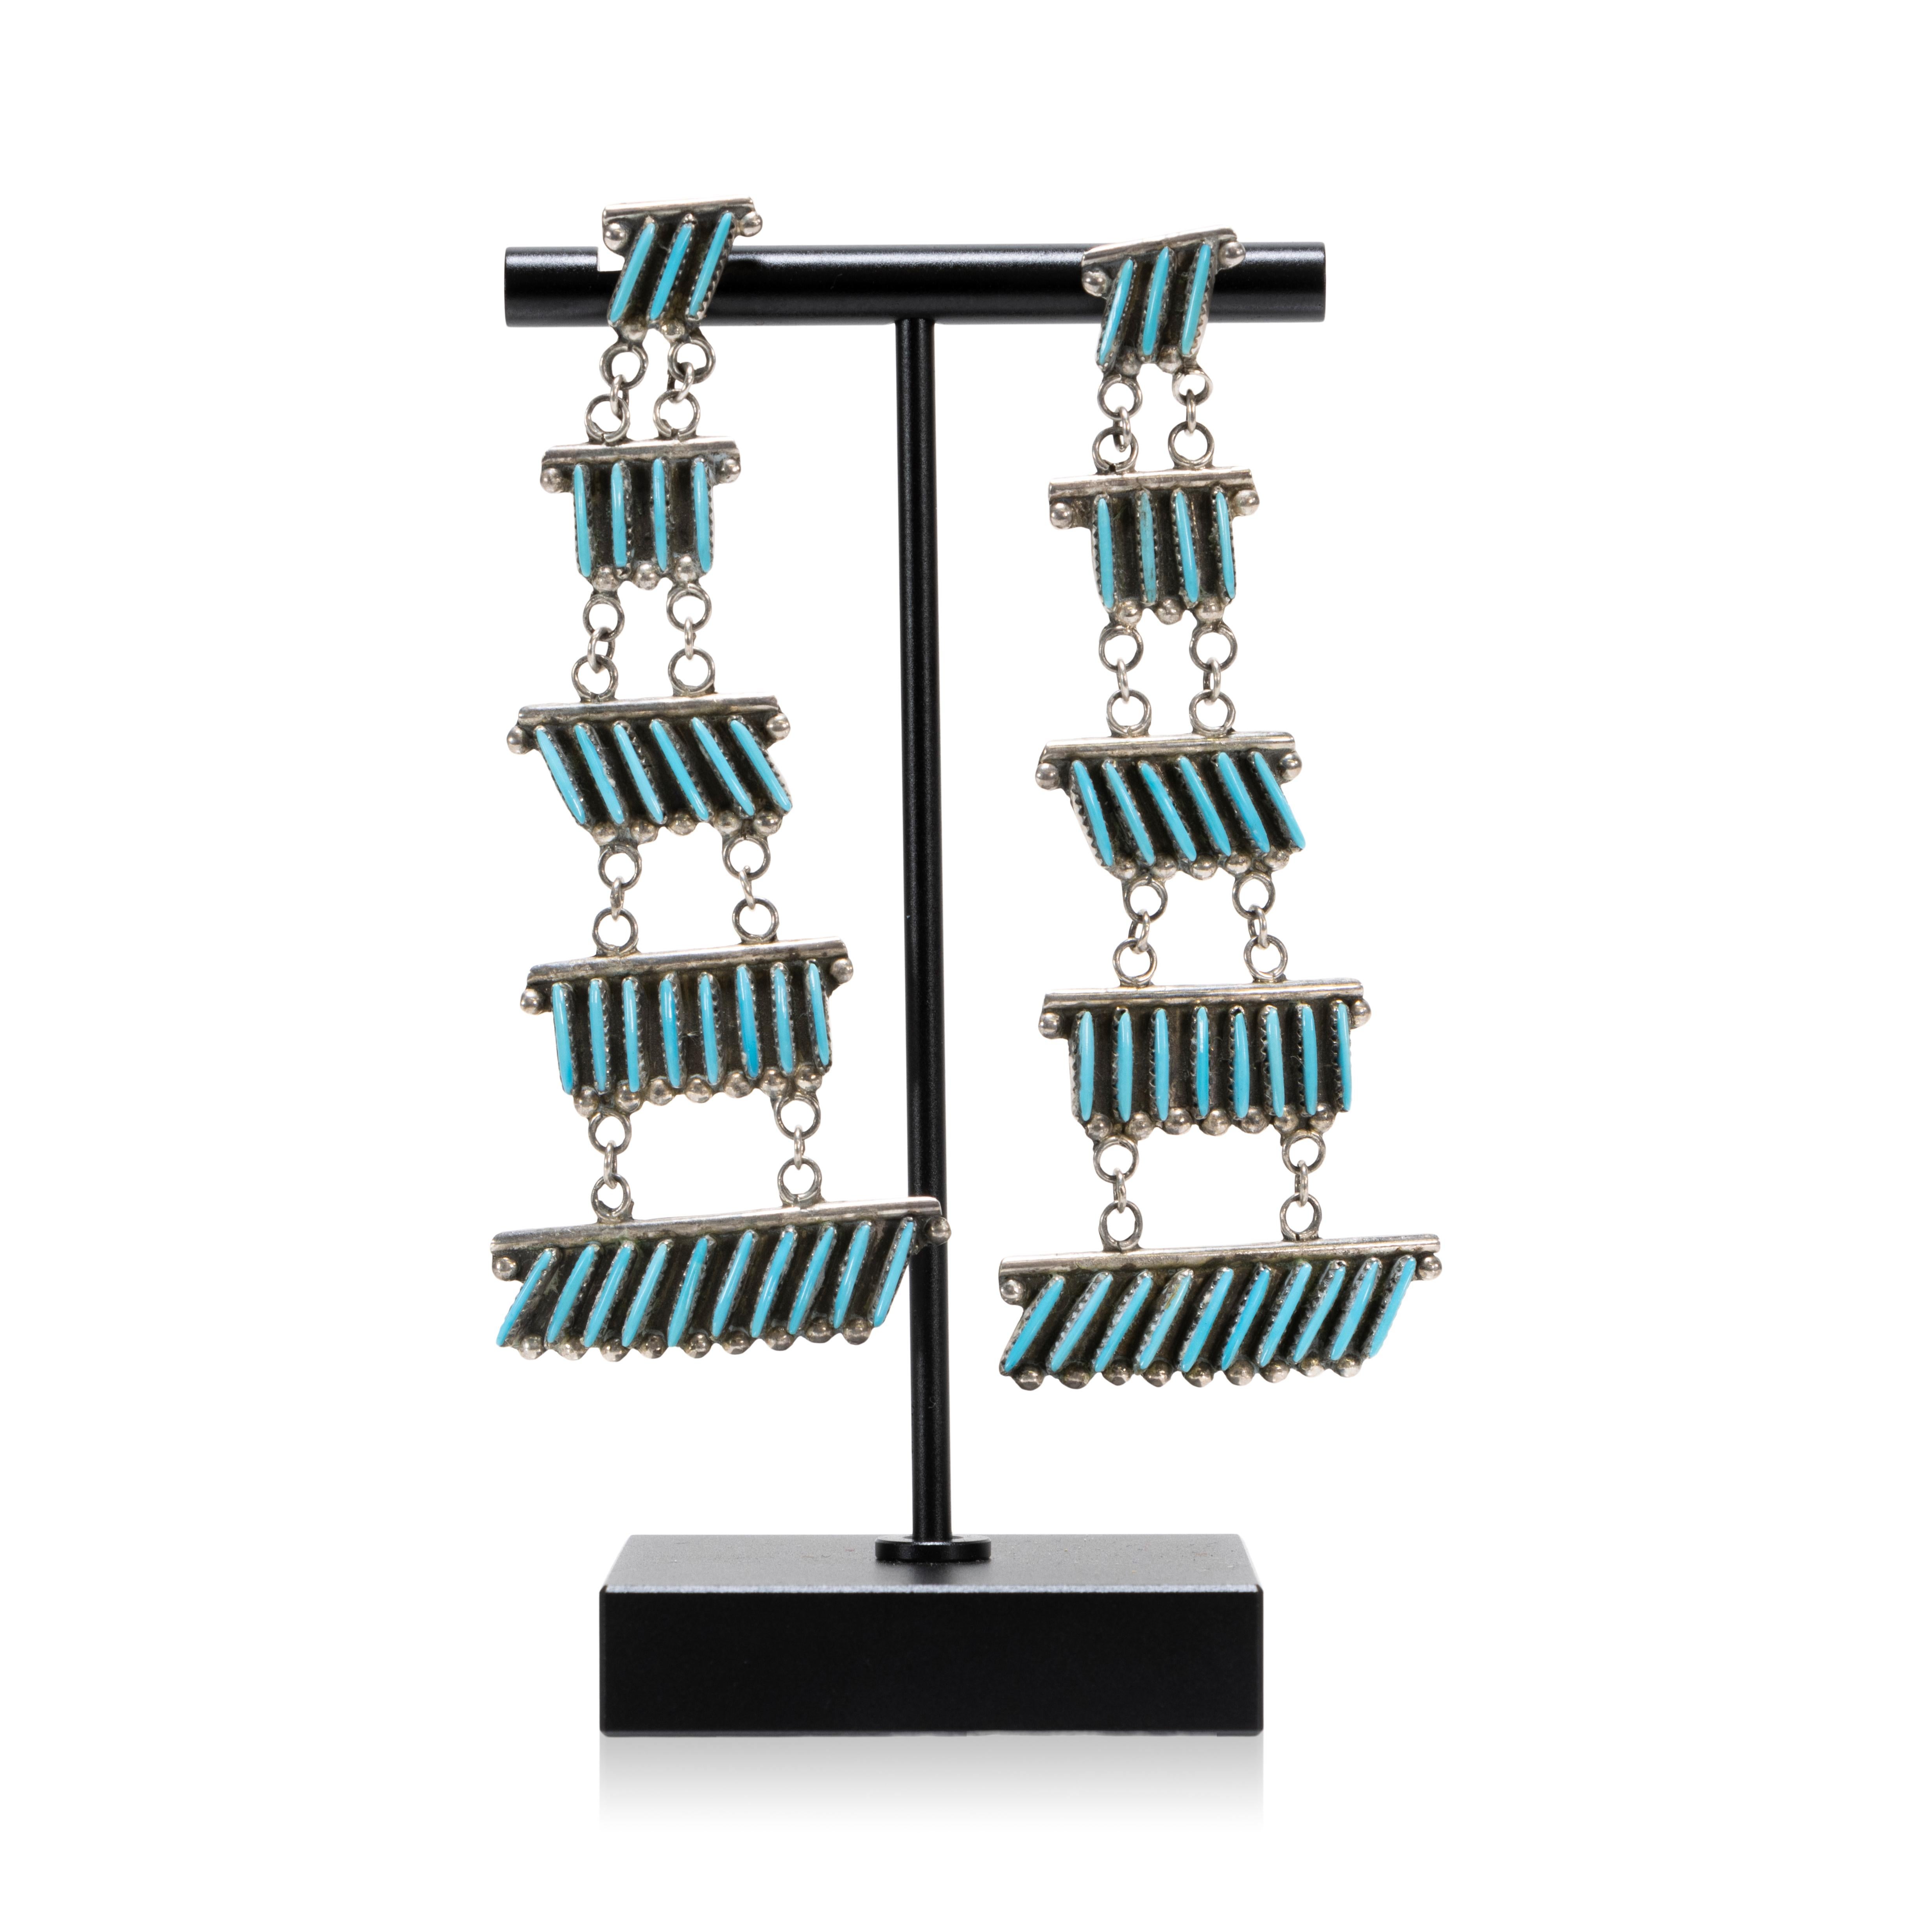 Zuni Sleeping Beauty turquoise needlepoint earrings with 31 slivers of turquoise arranged on four levels. Set in sterling silver. Lightweight with post backs.

PERIOD: Mid 20th Century

ORIGIN: Southwest - Zuni, Native American

SIZE: 3